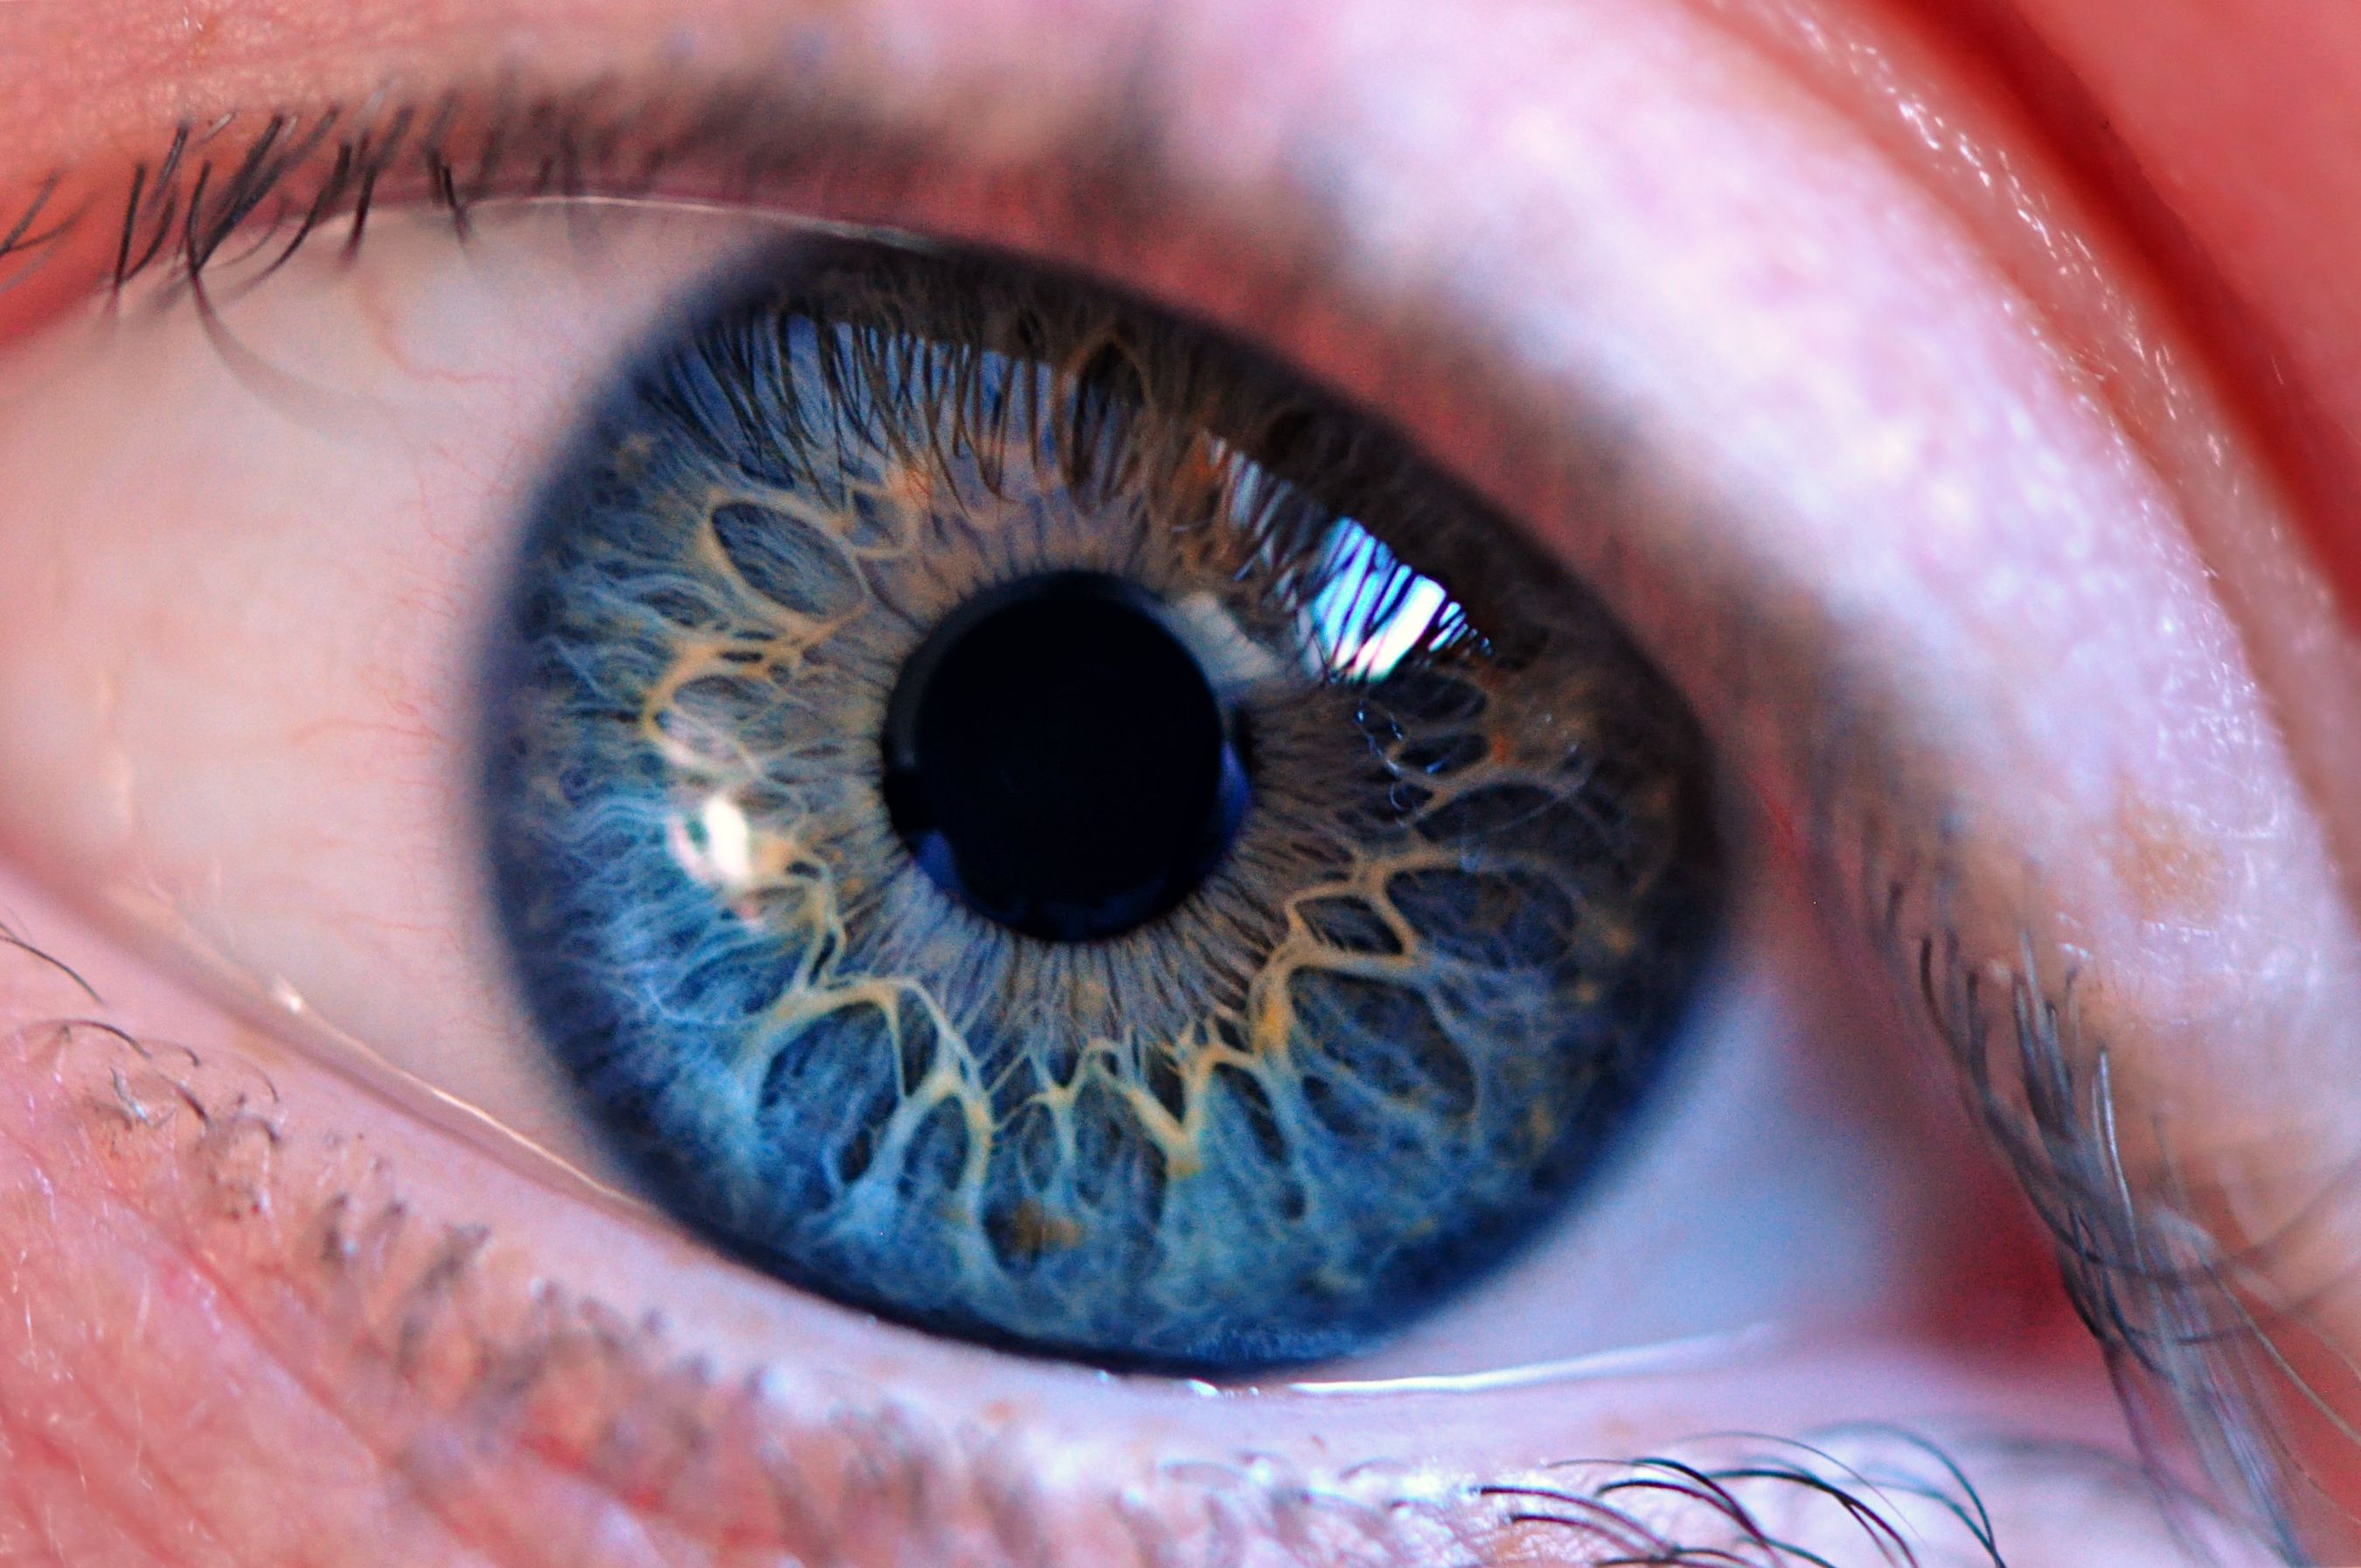 Your eyes can see in ultraviolet when the lens is completely removed